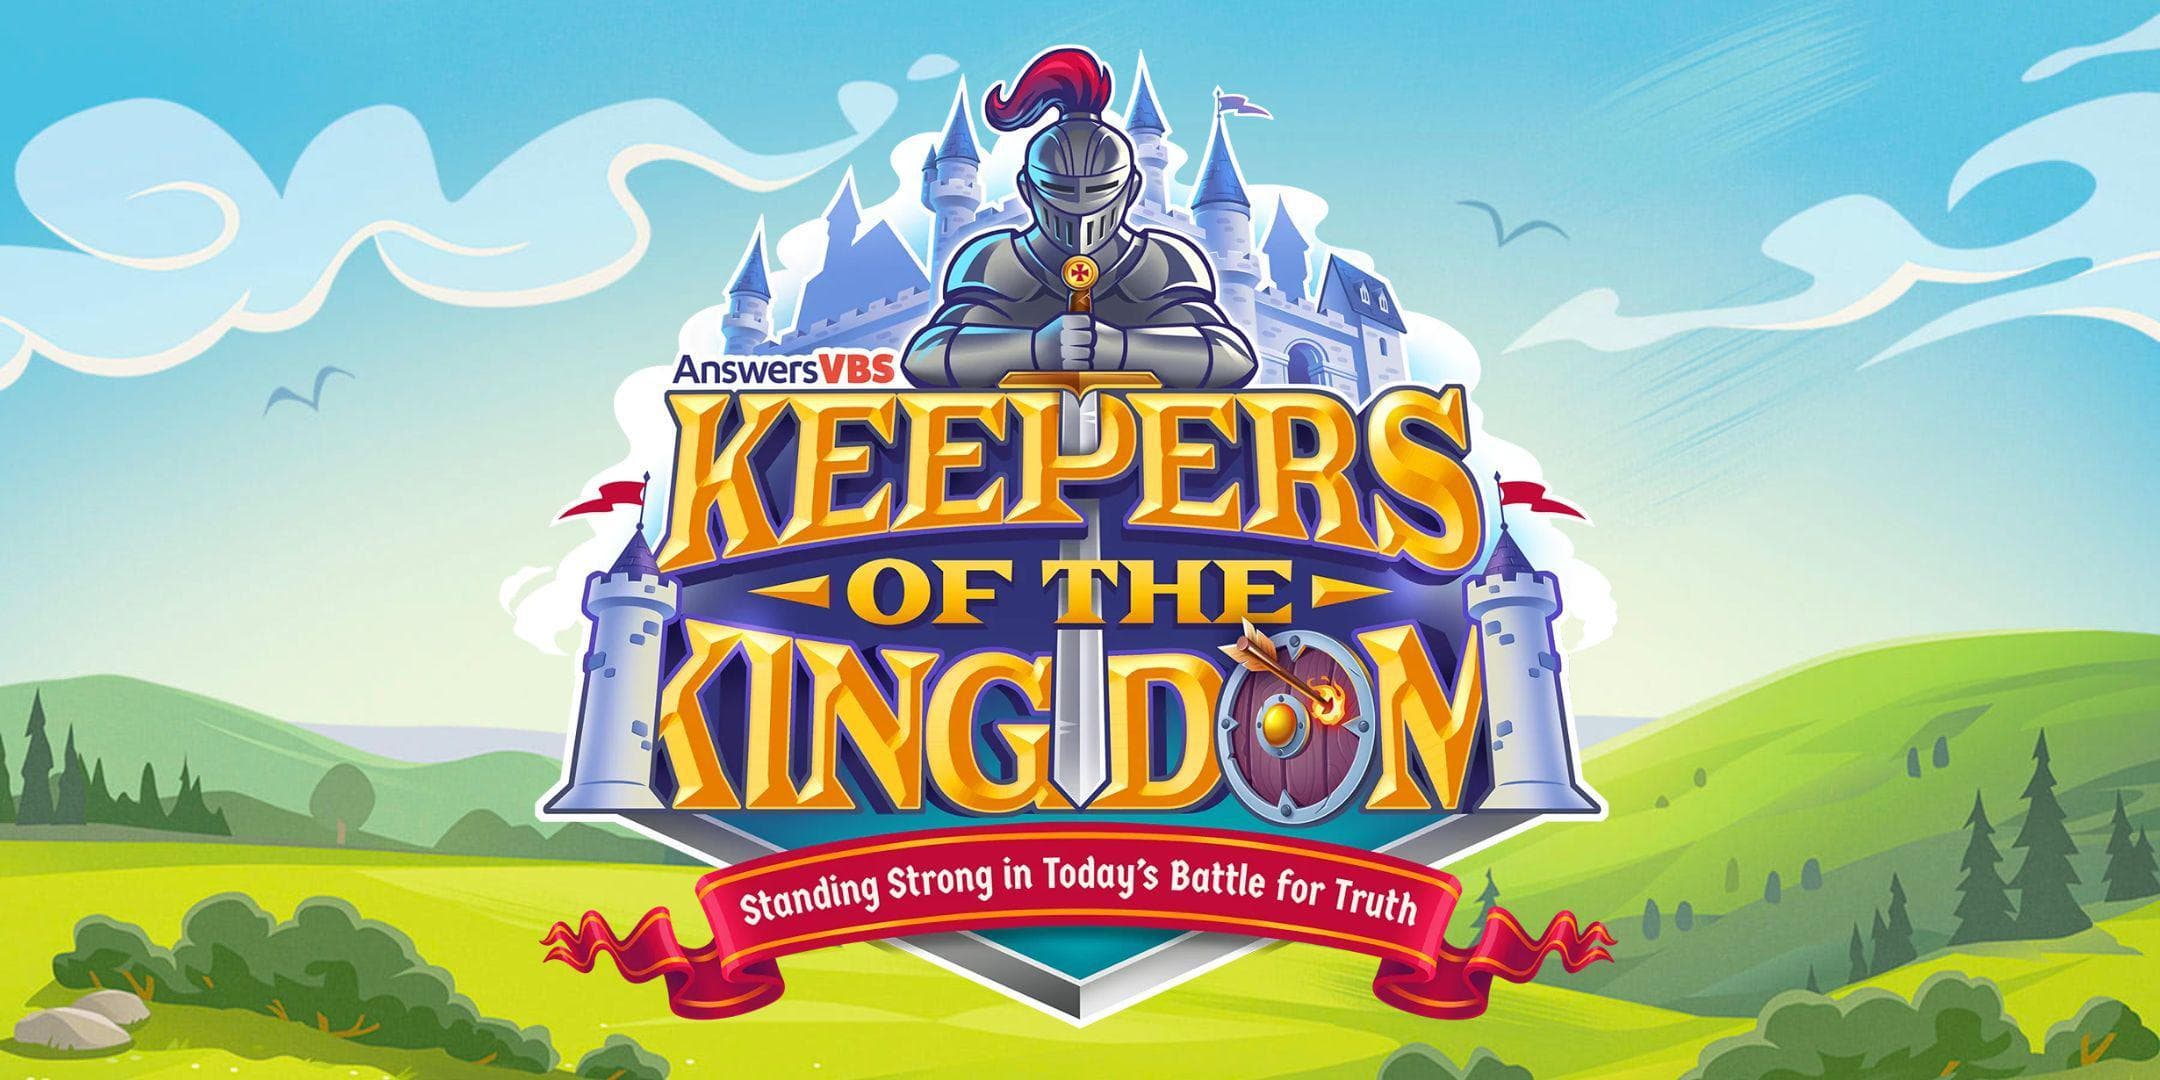 VBS Keepers of the Kingdom